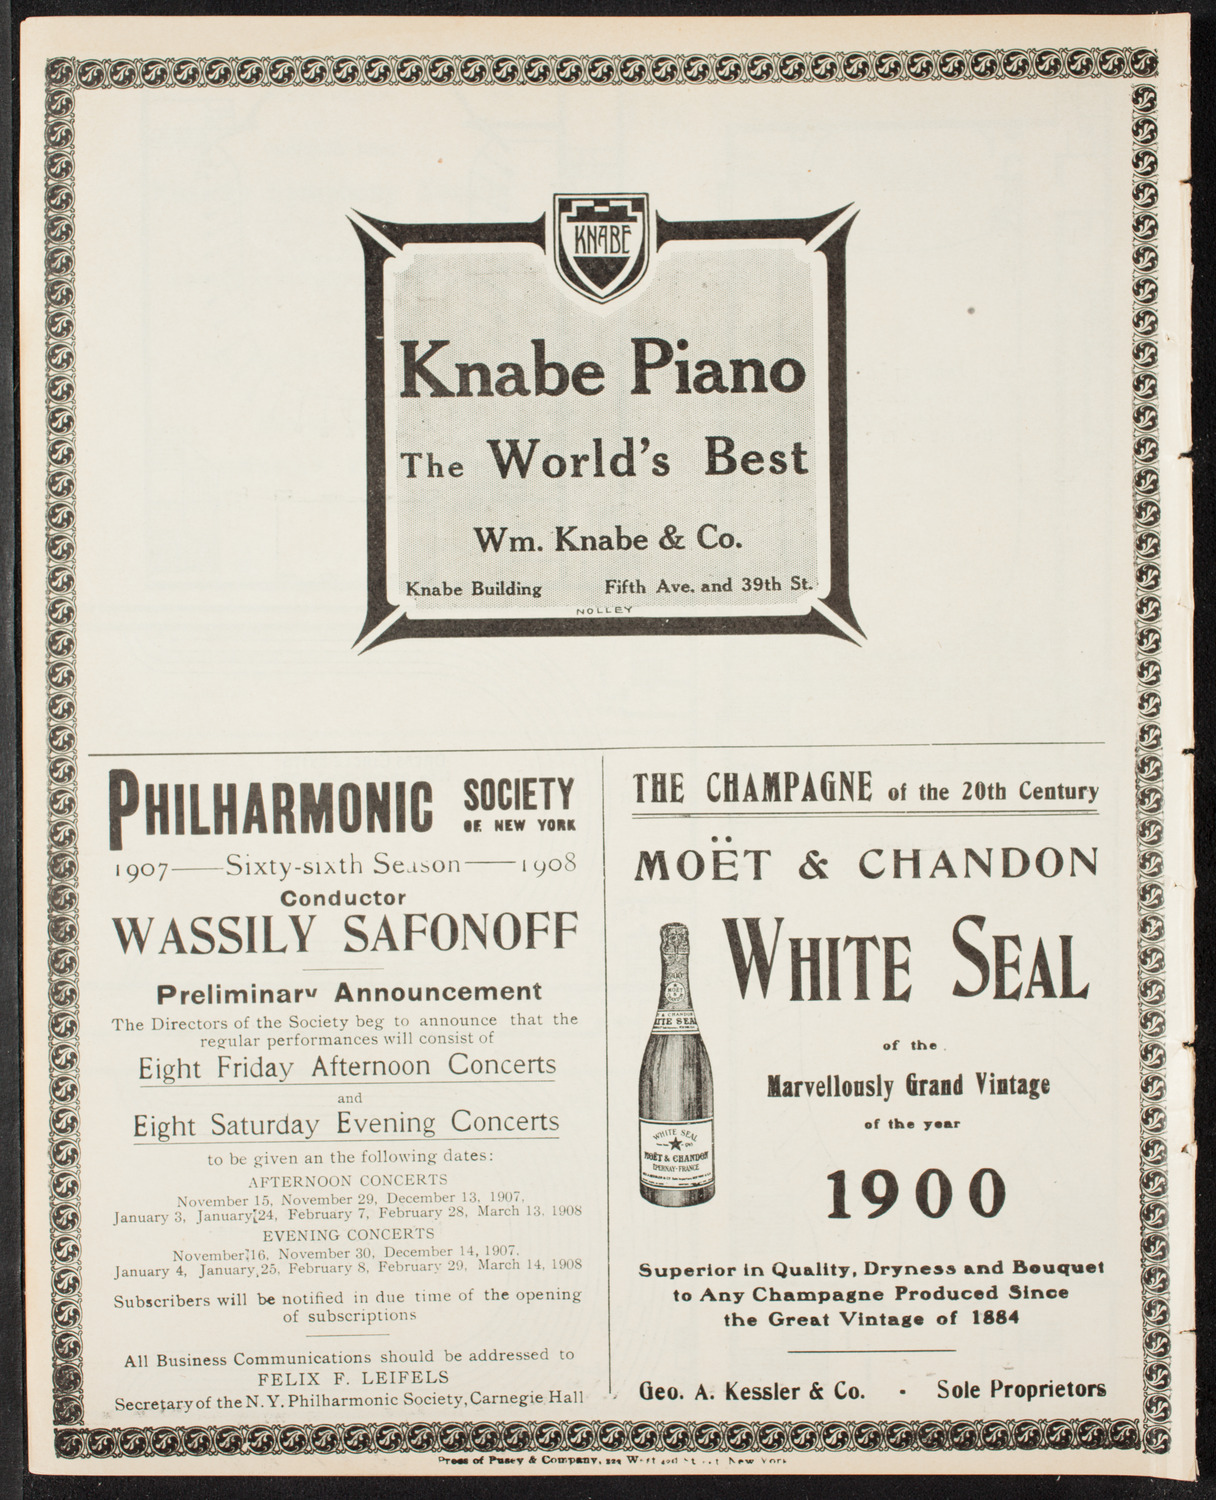 Graduation: College of Pharmacy of the City of New York, May 2, 1907, program page 12